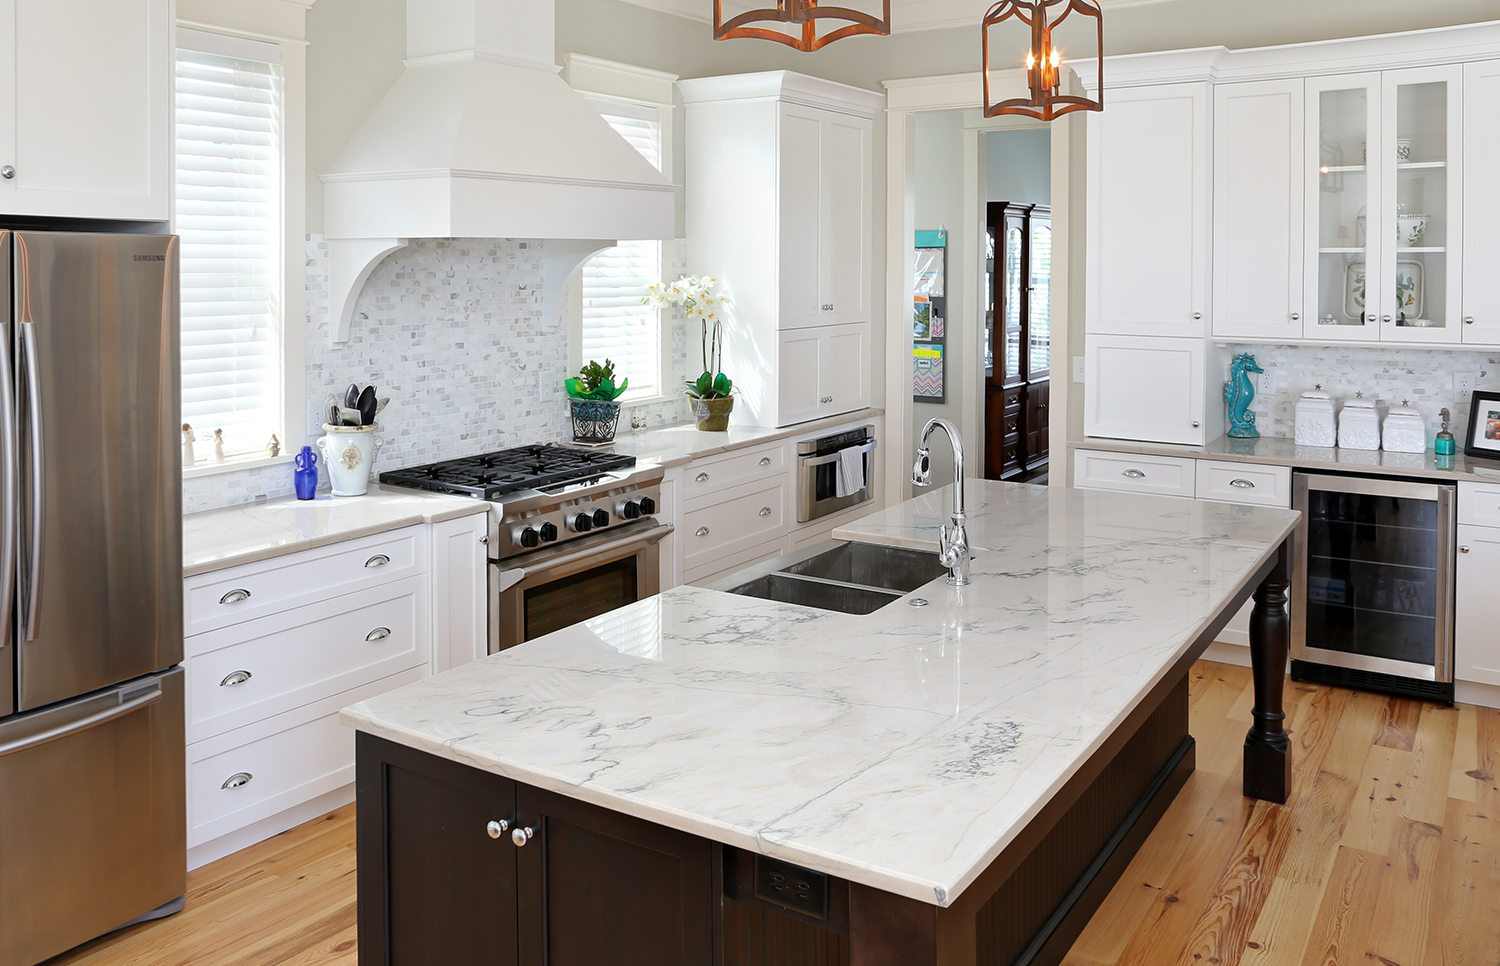 What Should You Consider for Your New Kitchen Countertop?